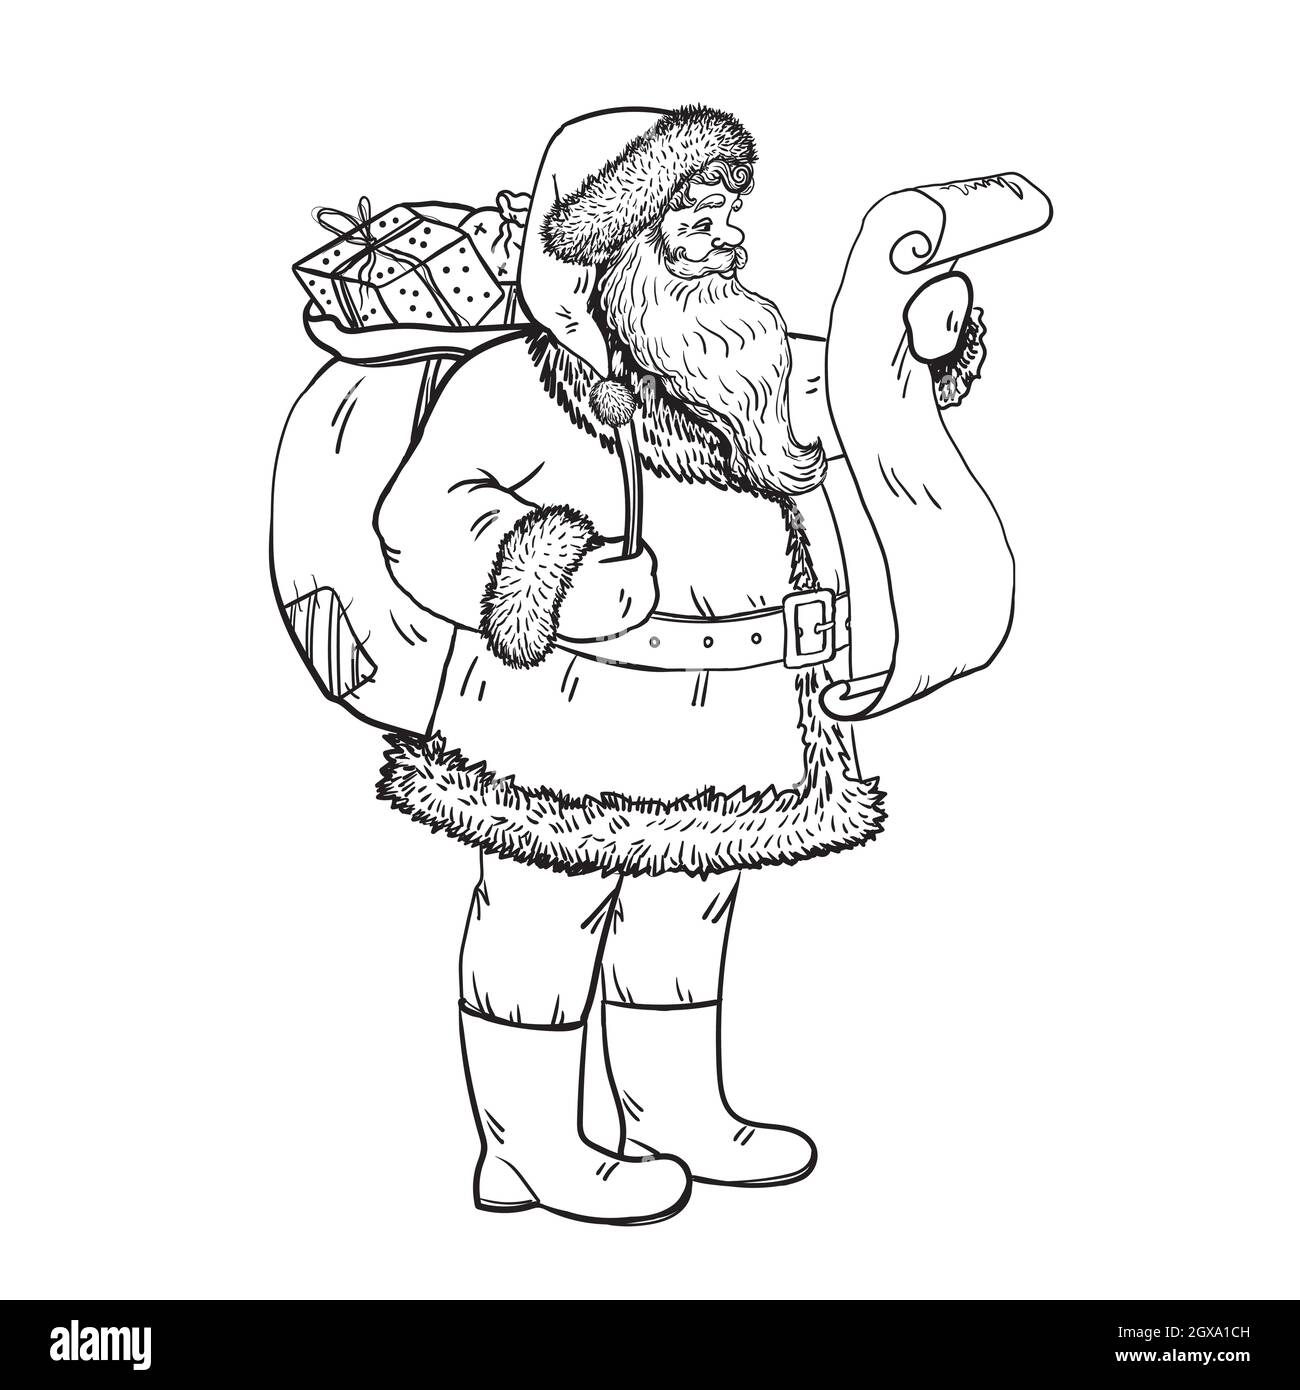 Santa Claus is reading a letter. Santa Claus carries a bag with gifts, stock vector illustration. Stock Vector